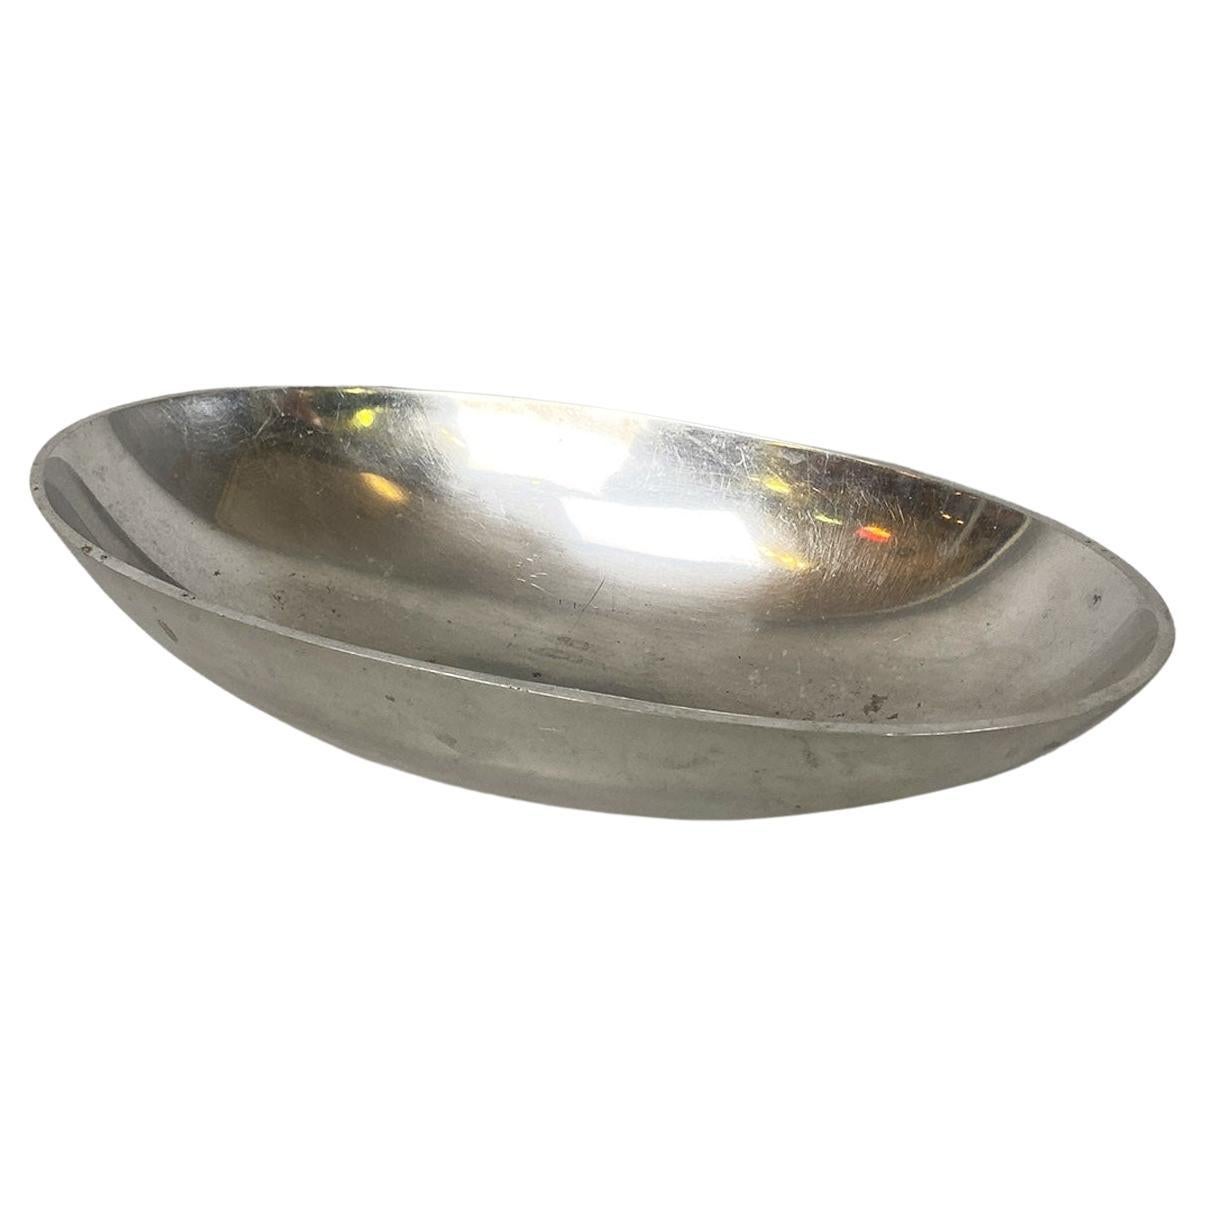 Italian modern metal oval serving bowl or container by La Rinascente, 1990s For Sale